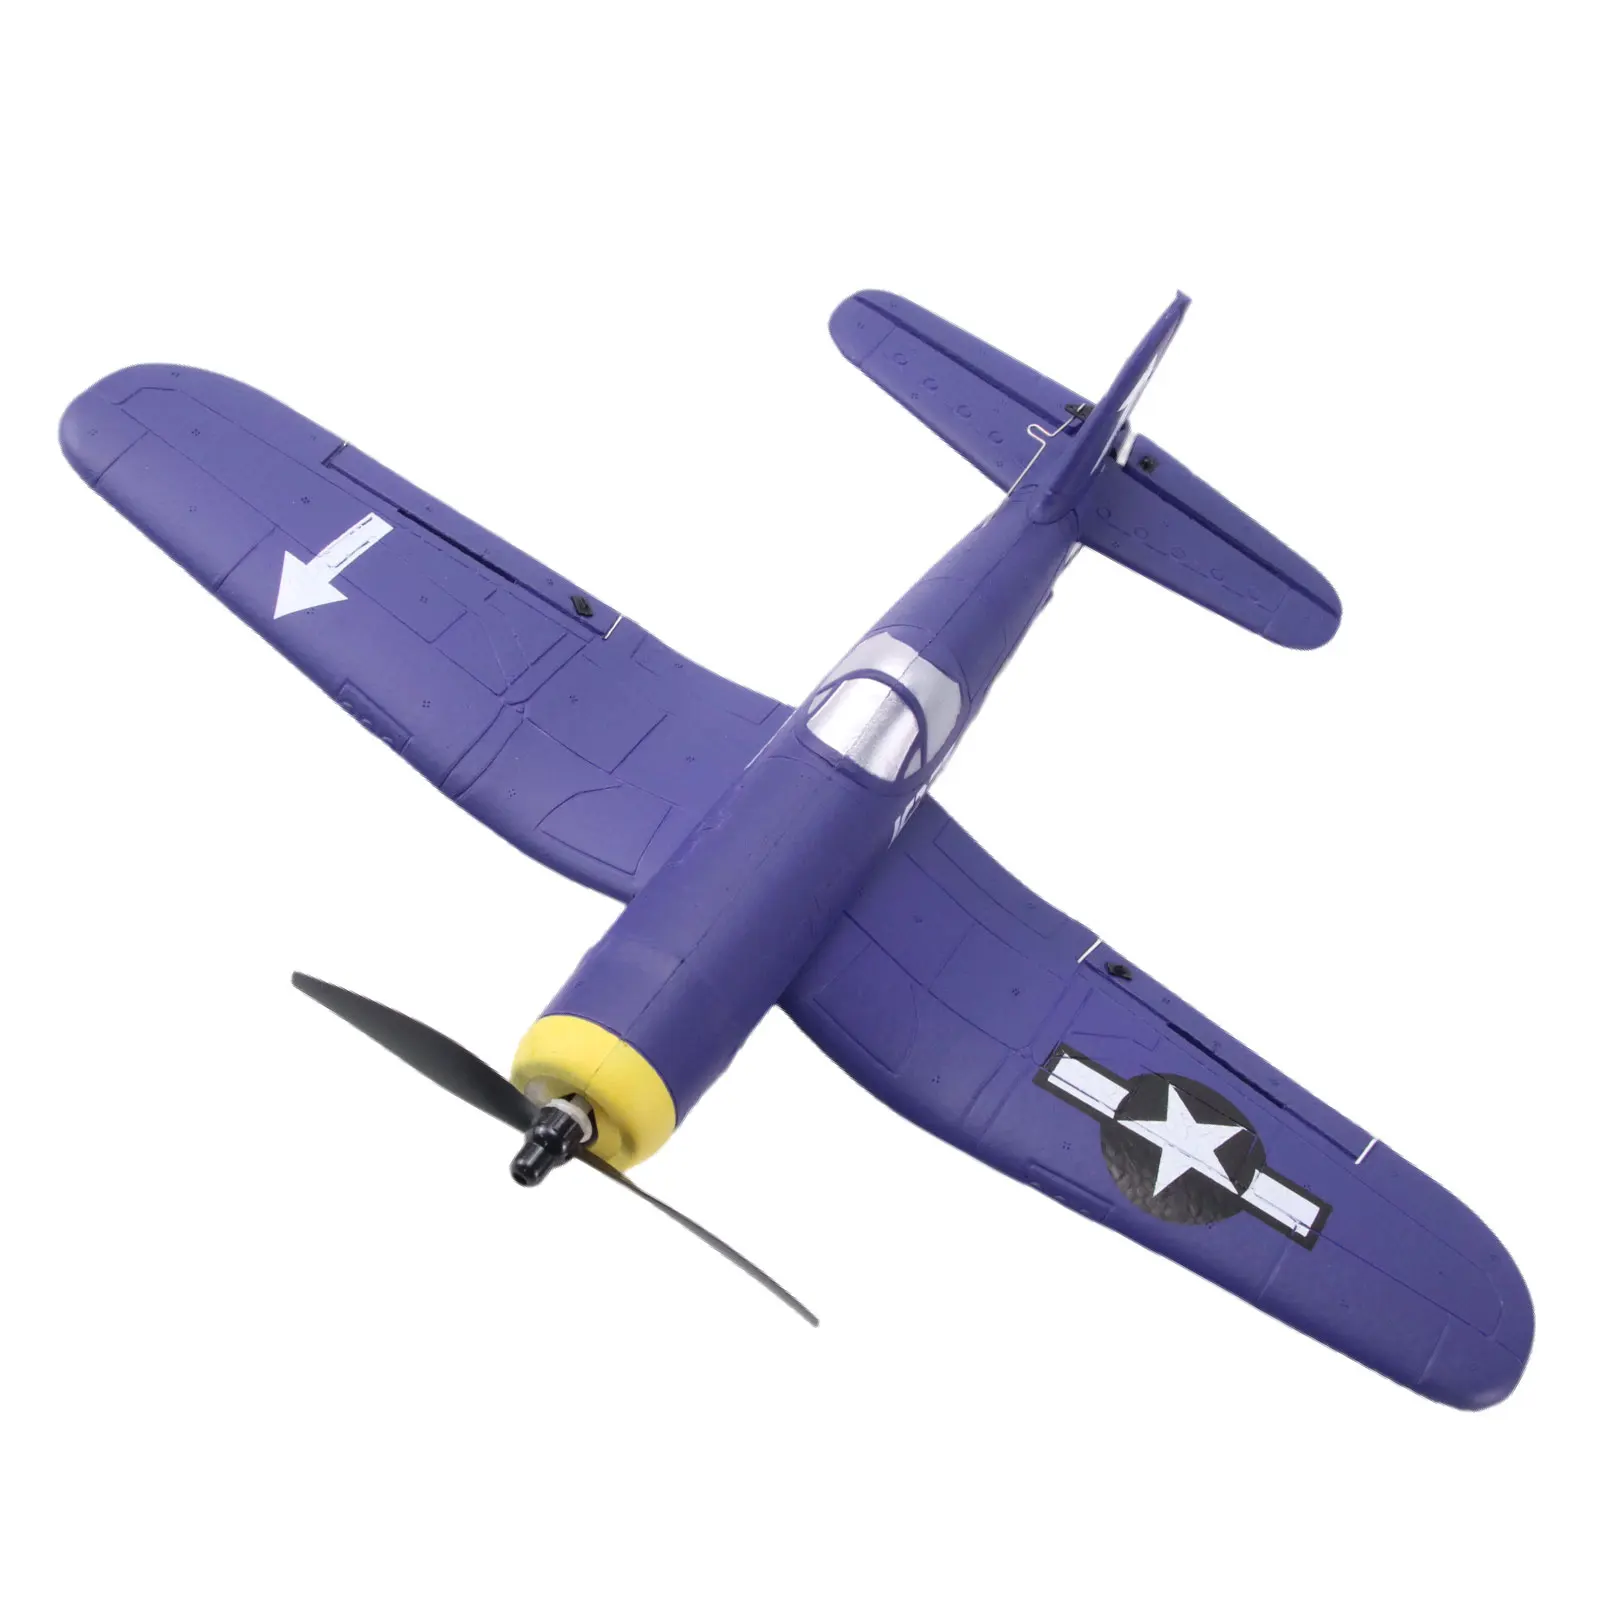 

Hot 4CH Remote Control Plane F4U Corsair 2.4Ghz RC Plane RTF EPP 761-8 400mm for Beginner rc Aircraft Toys for Children Adults